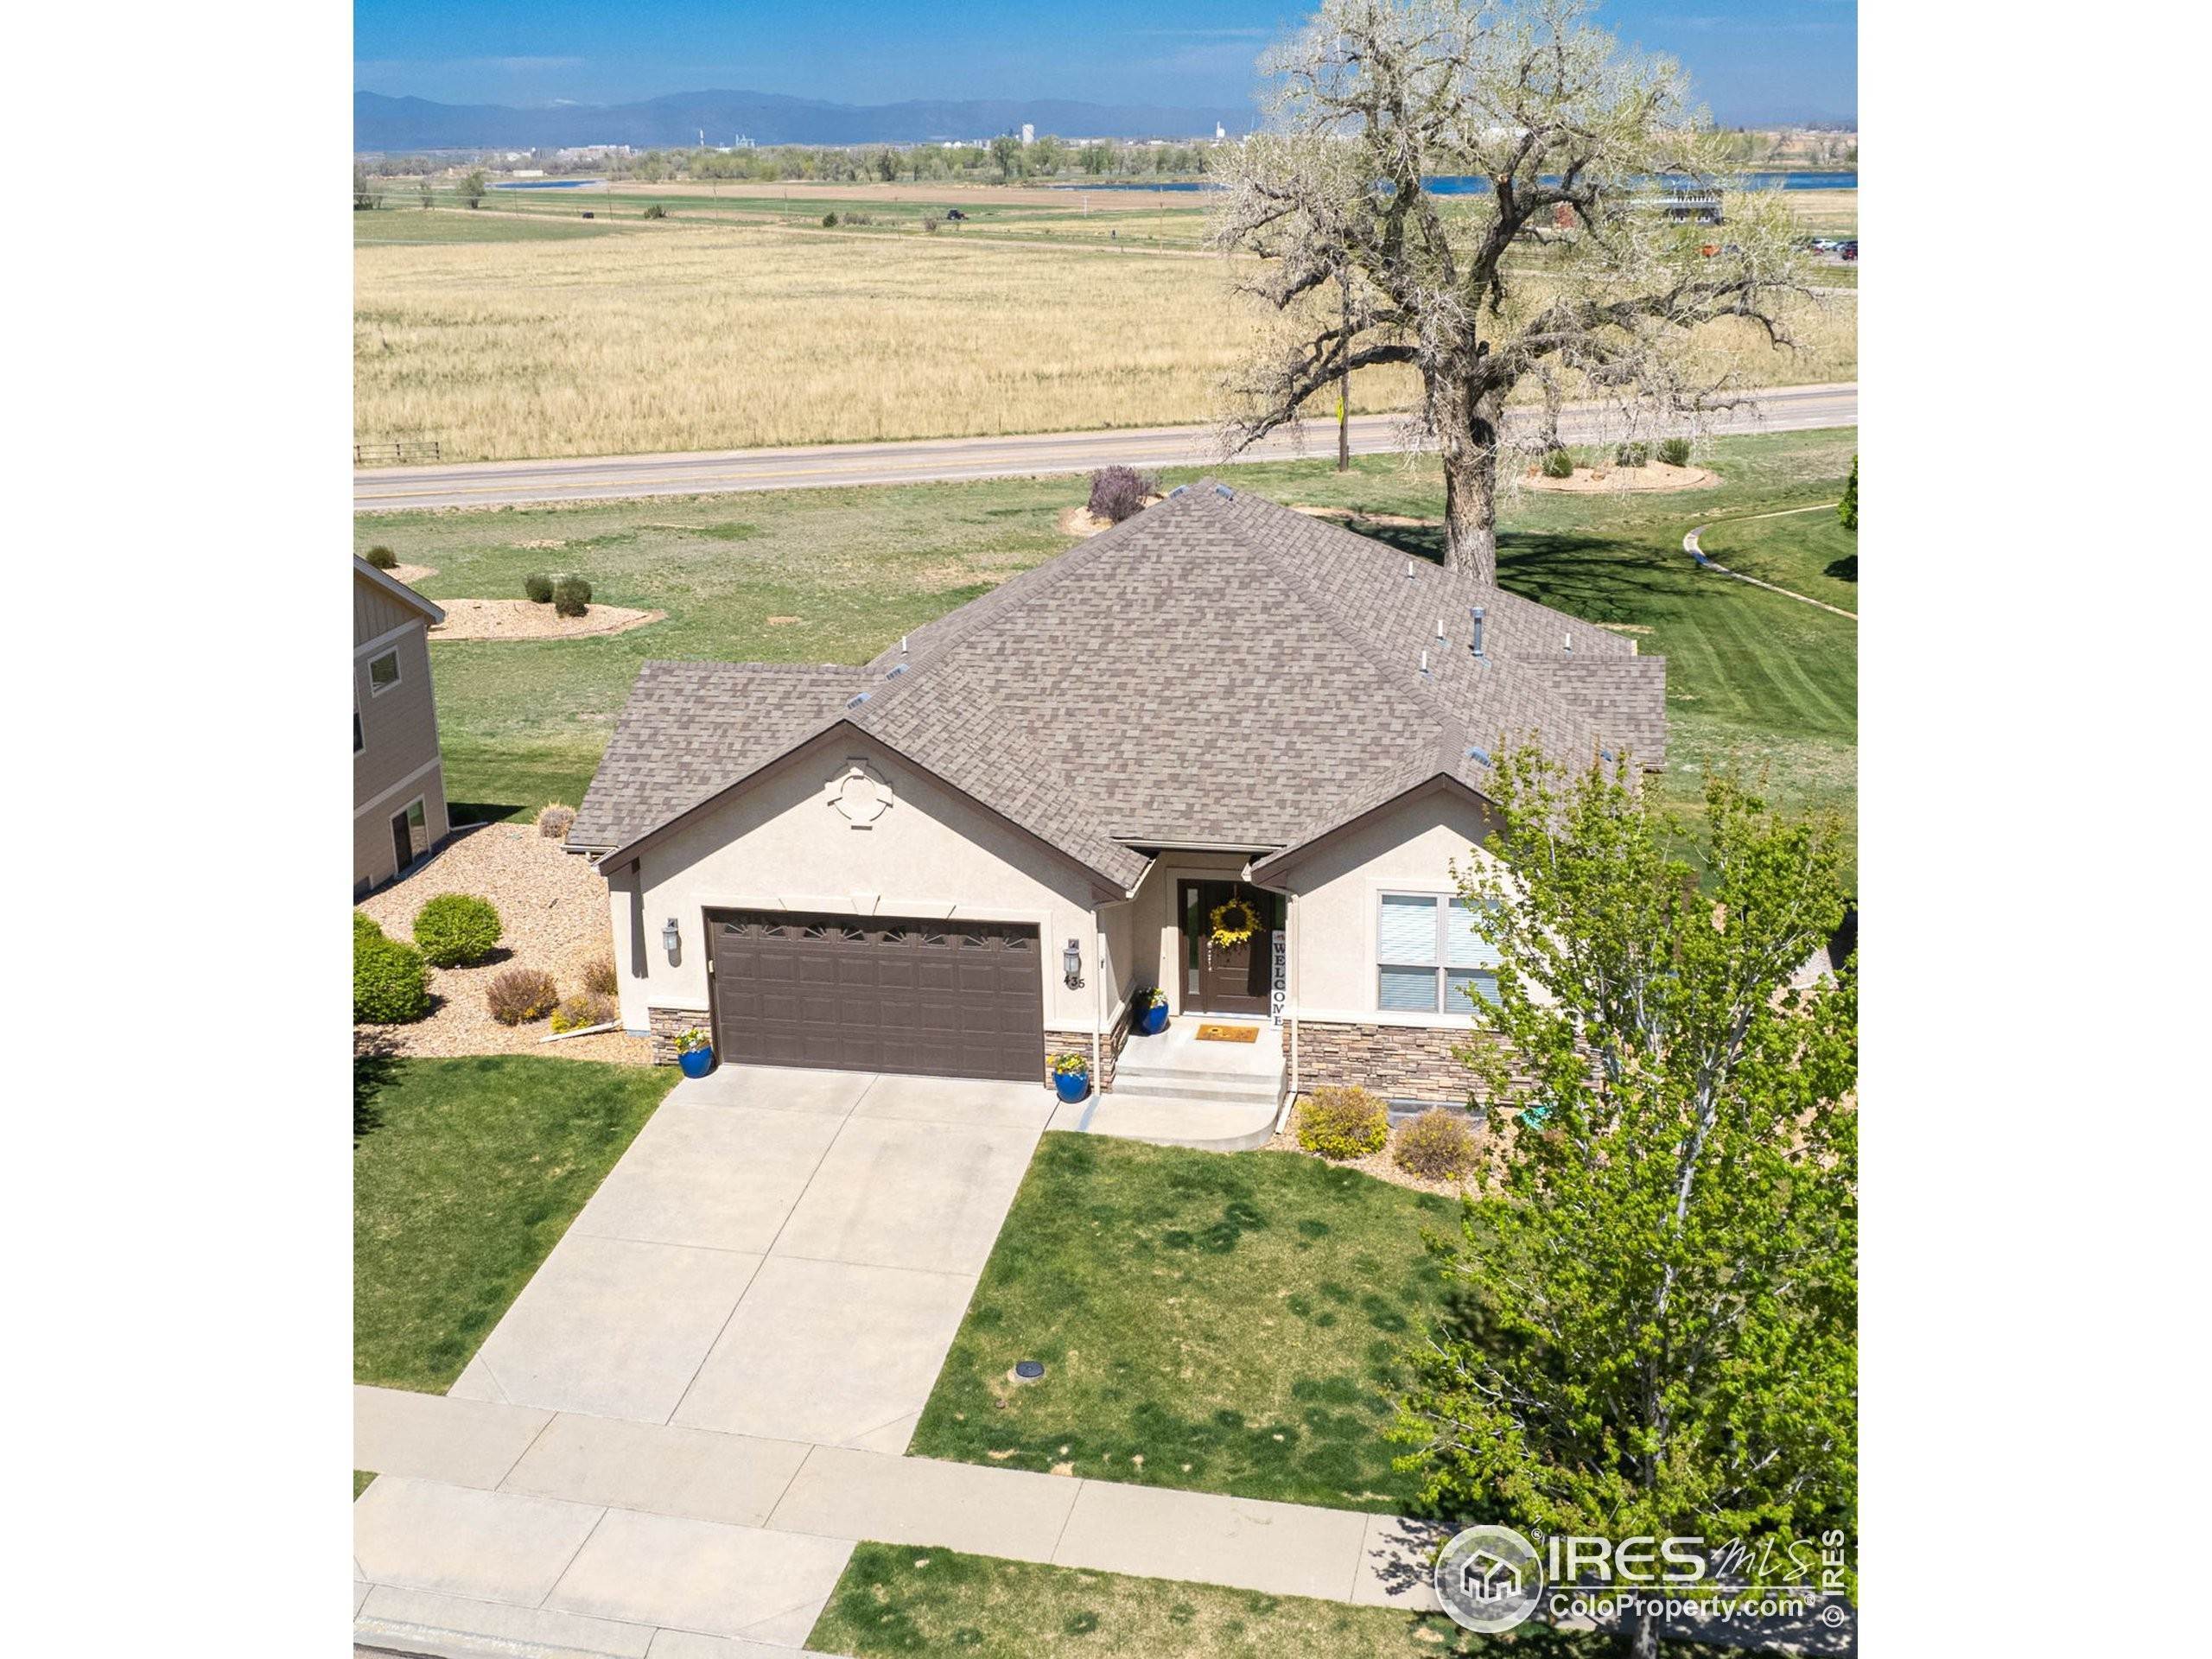 2. Single Family Homes for Active at 435 Double Tree Drive Greeley, Colorado 80634 United States